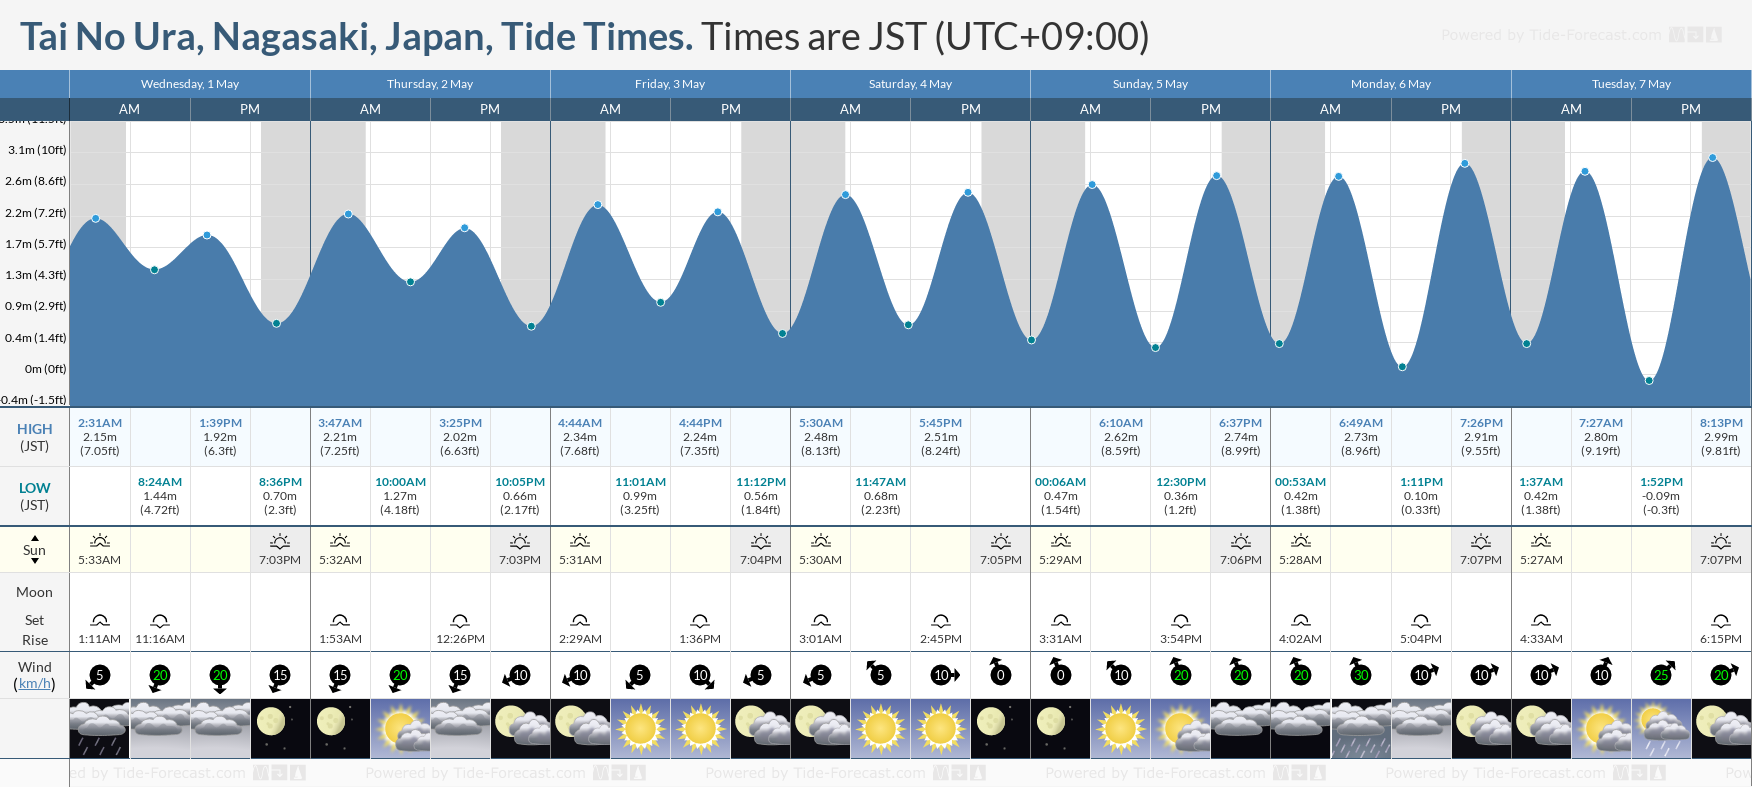 Tai No Ura, Nagasaki, Japan Tide Chart including high and low tide tide times for the next 7 days